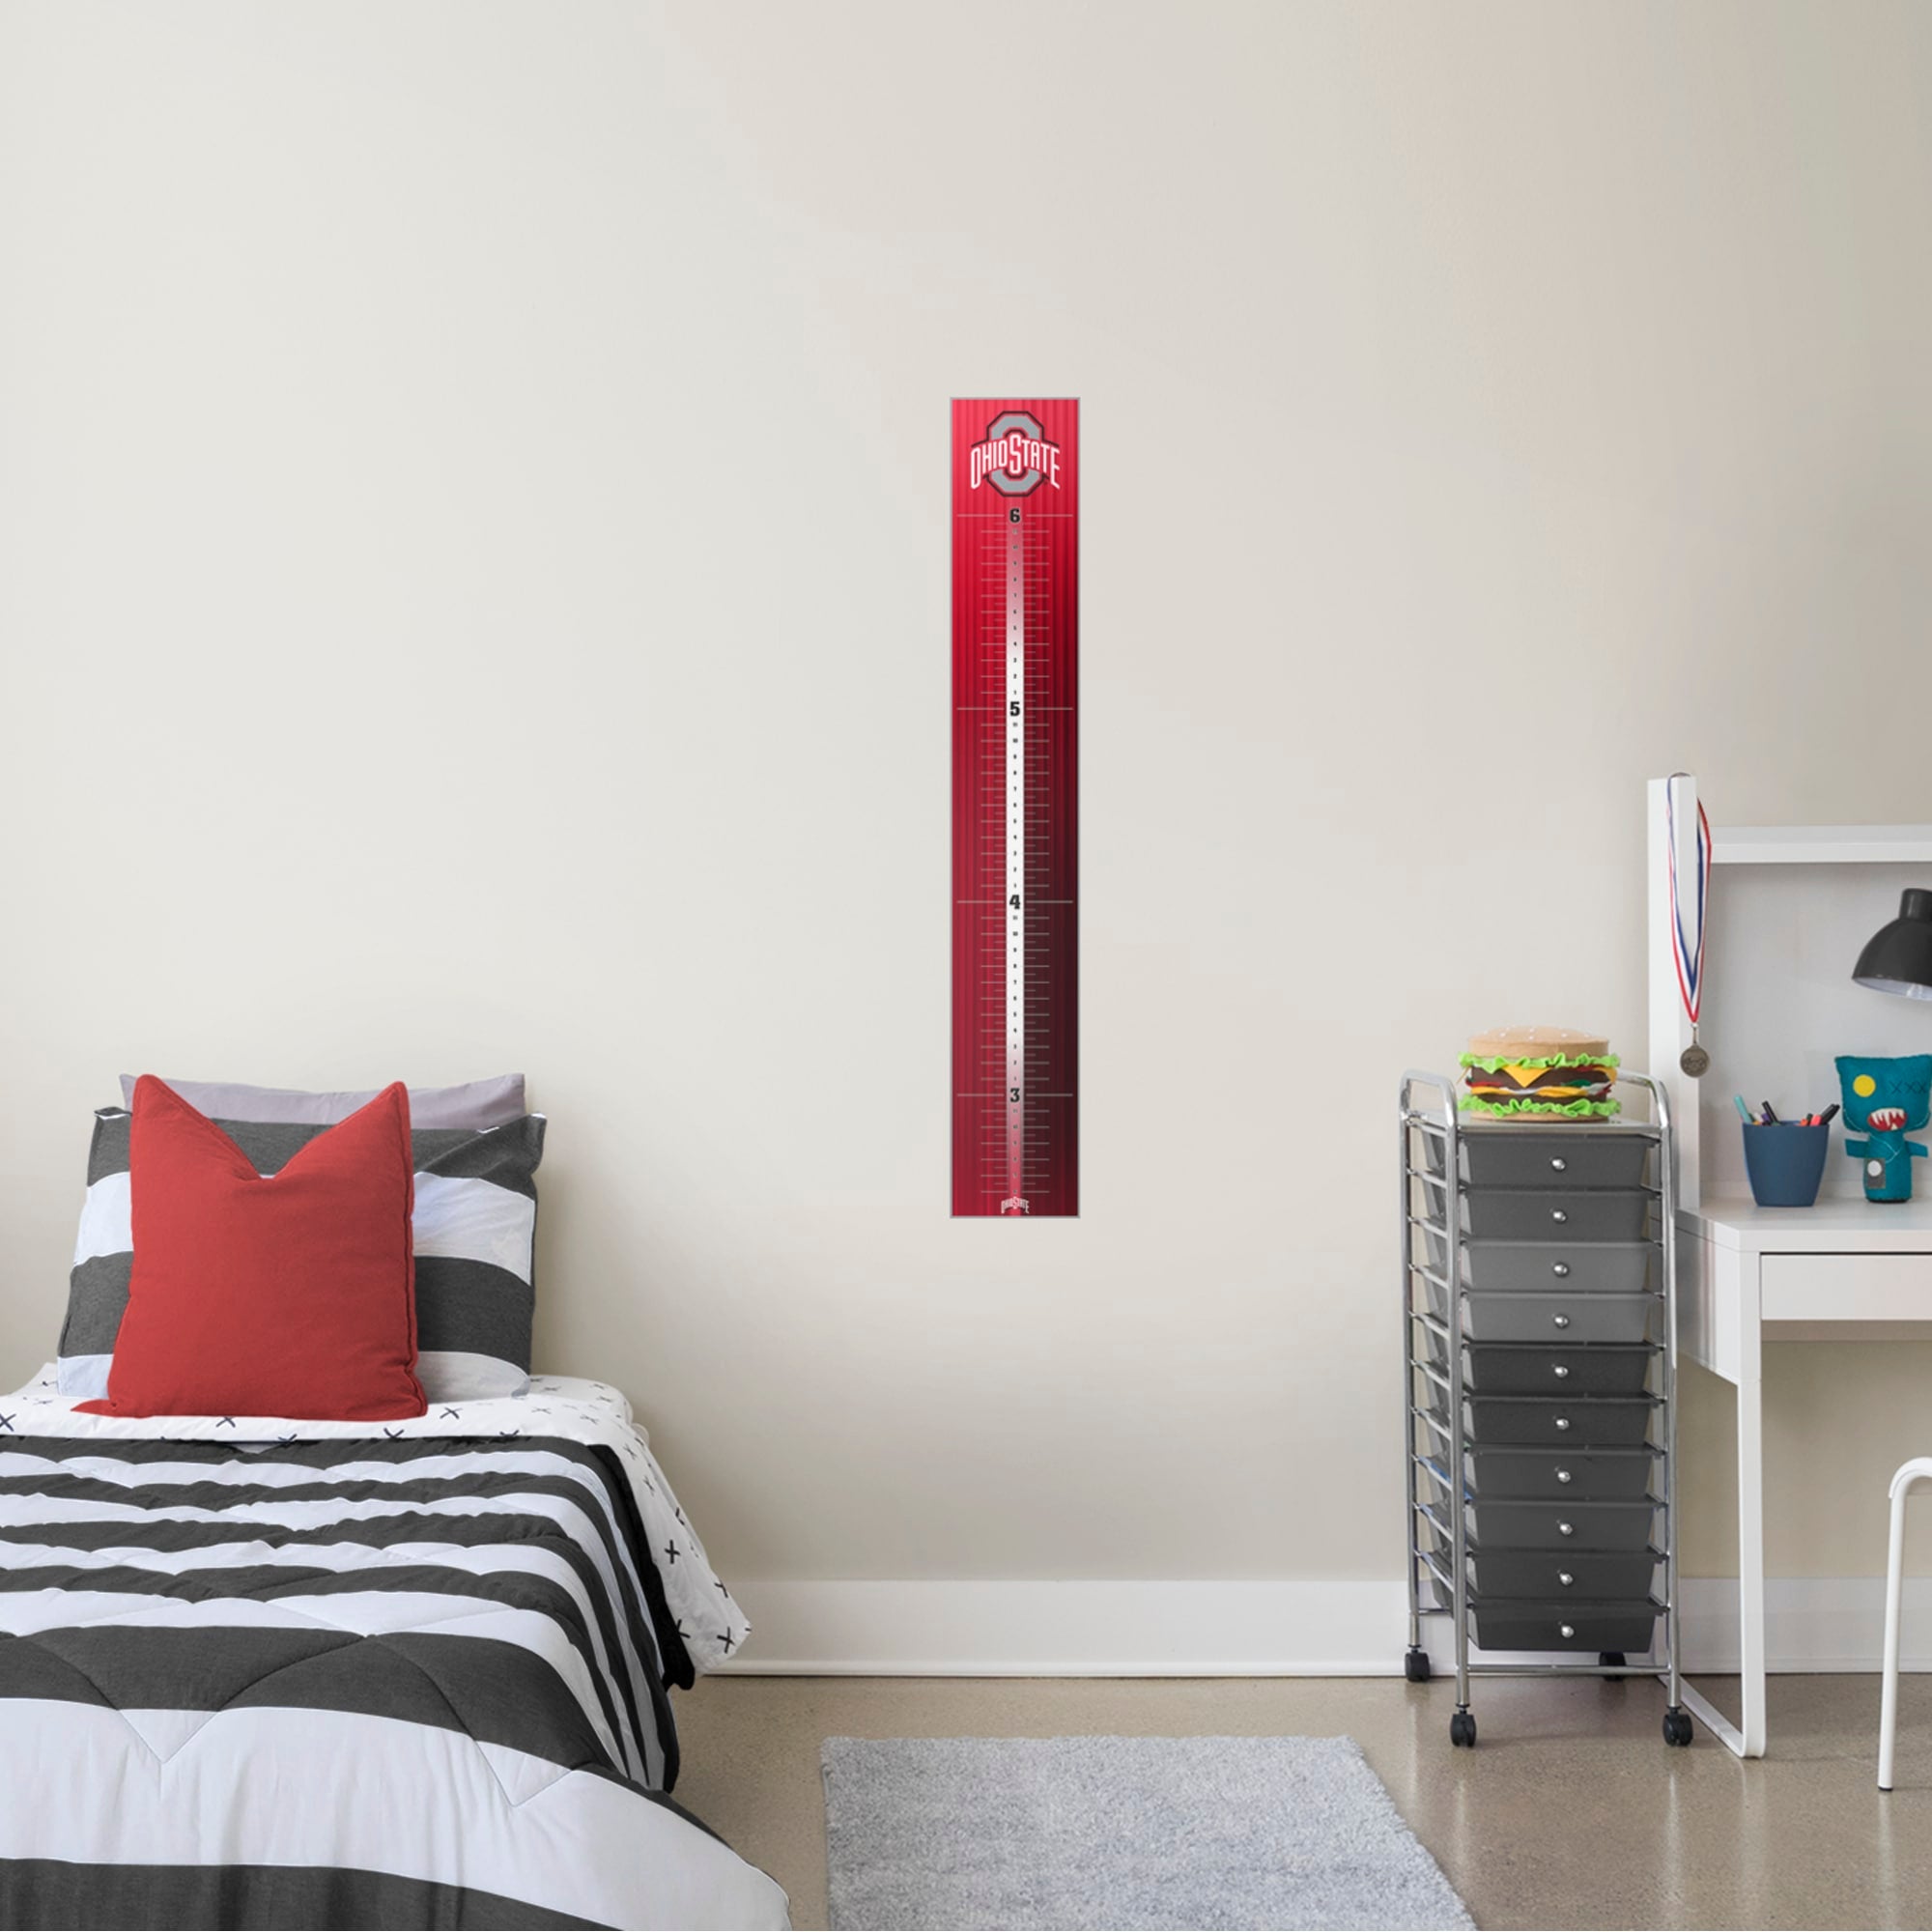 Ohio State Buckeyes: Logo Growth Chart - Officially Licensed Removable Wall Decal 8.0"W x 51.0"H by Fathead | Vinyl